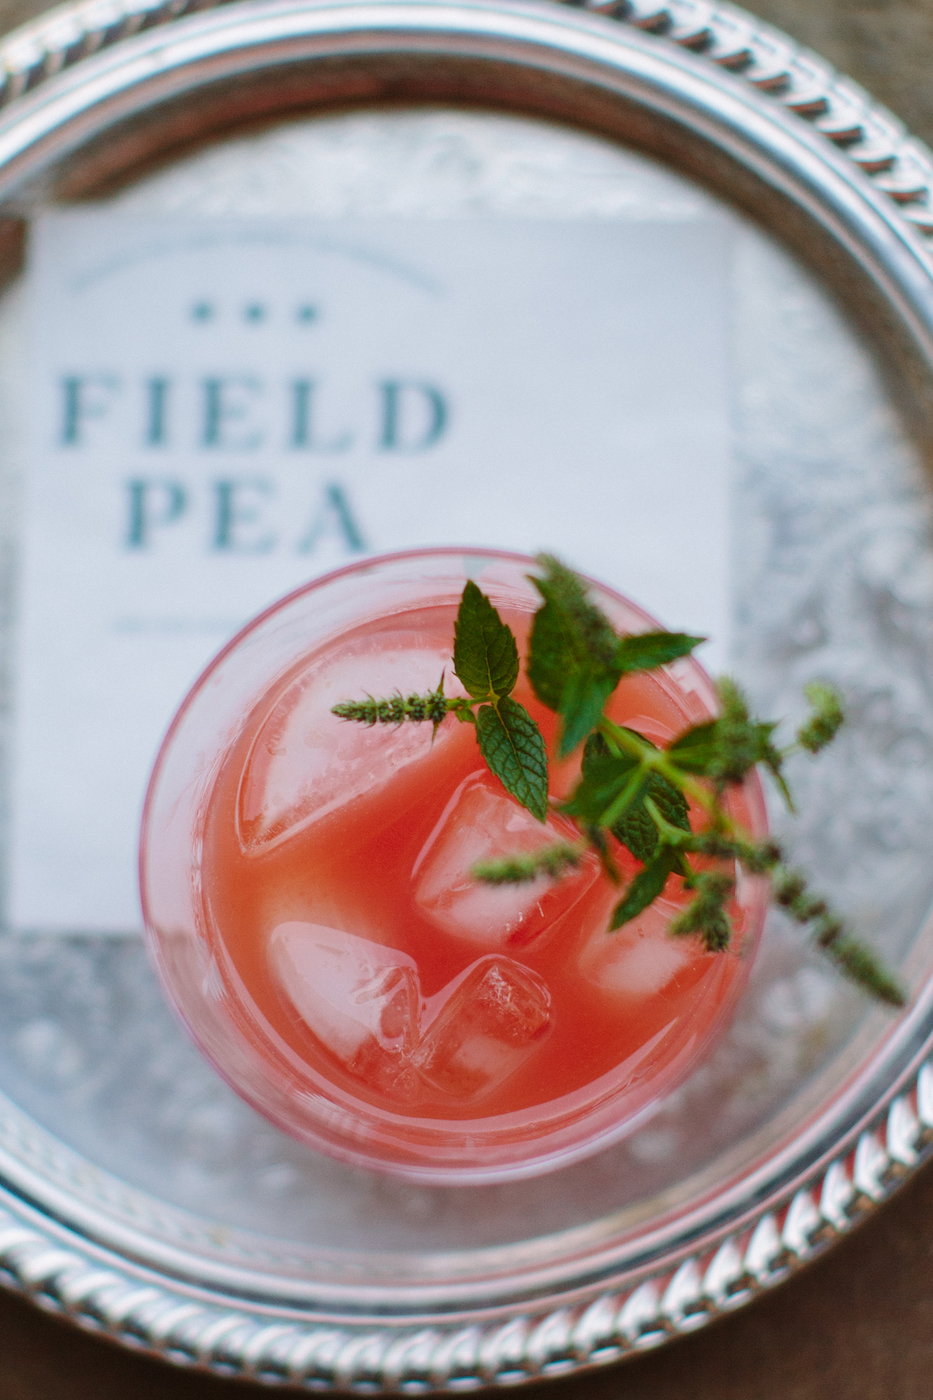 iced pink drink on a tray engraved with field pea